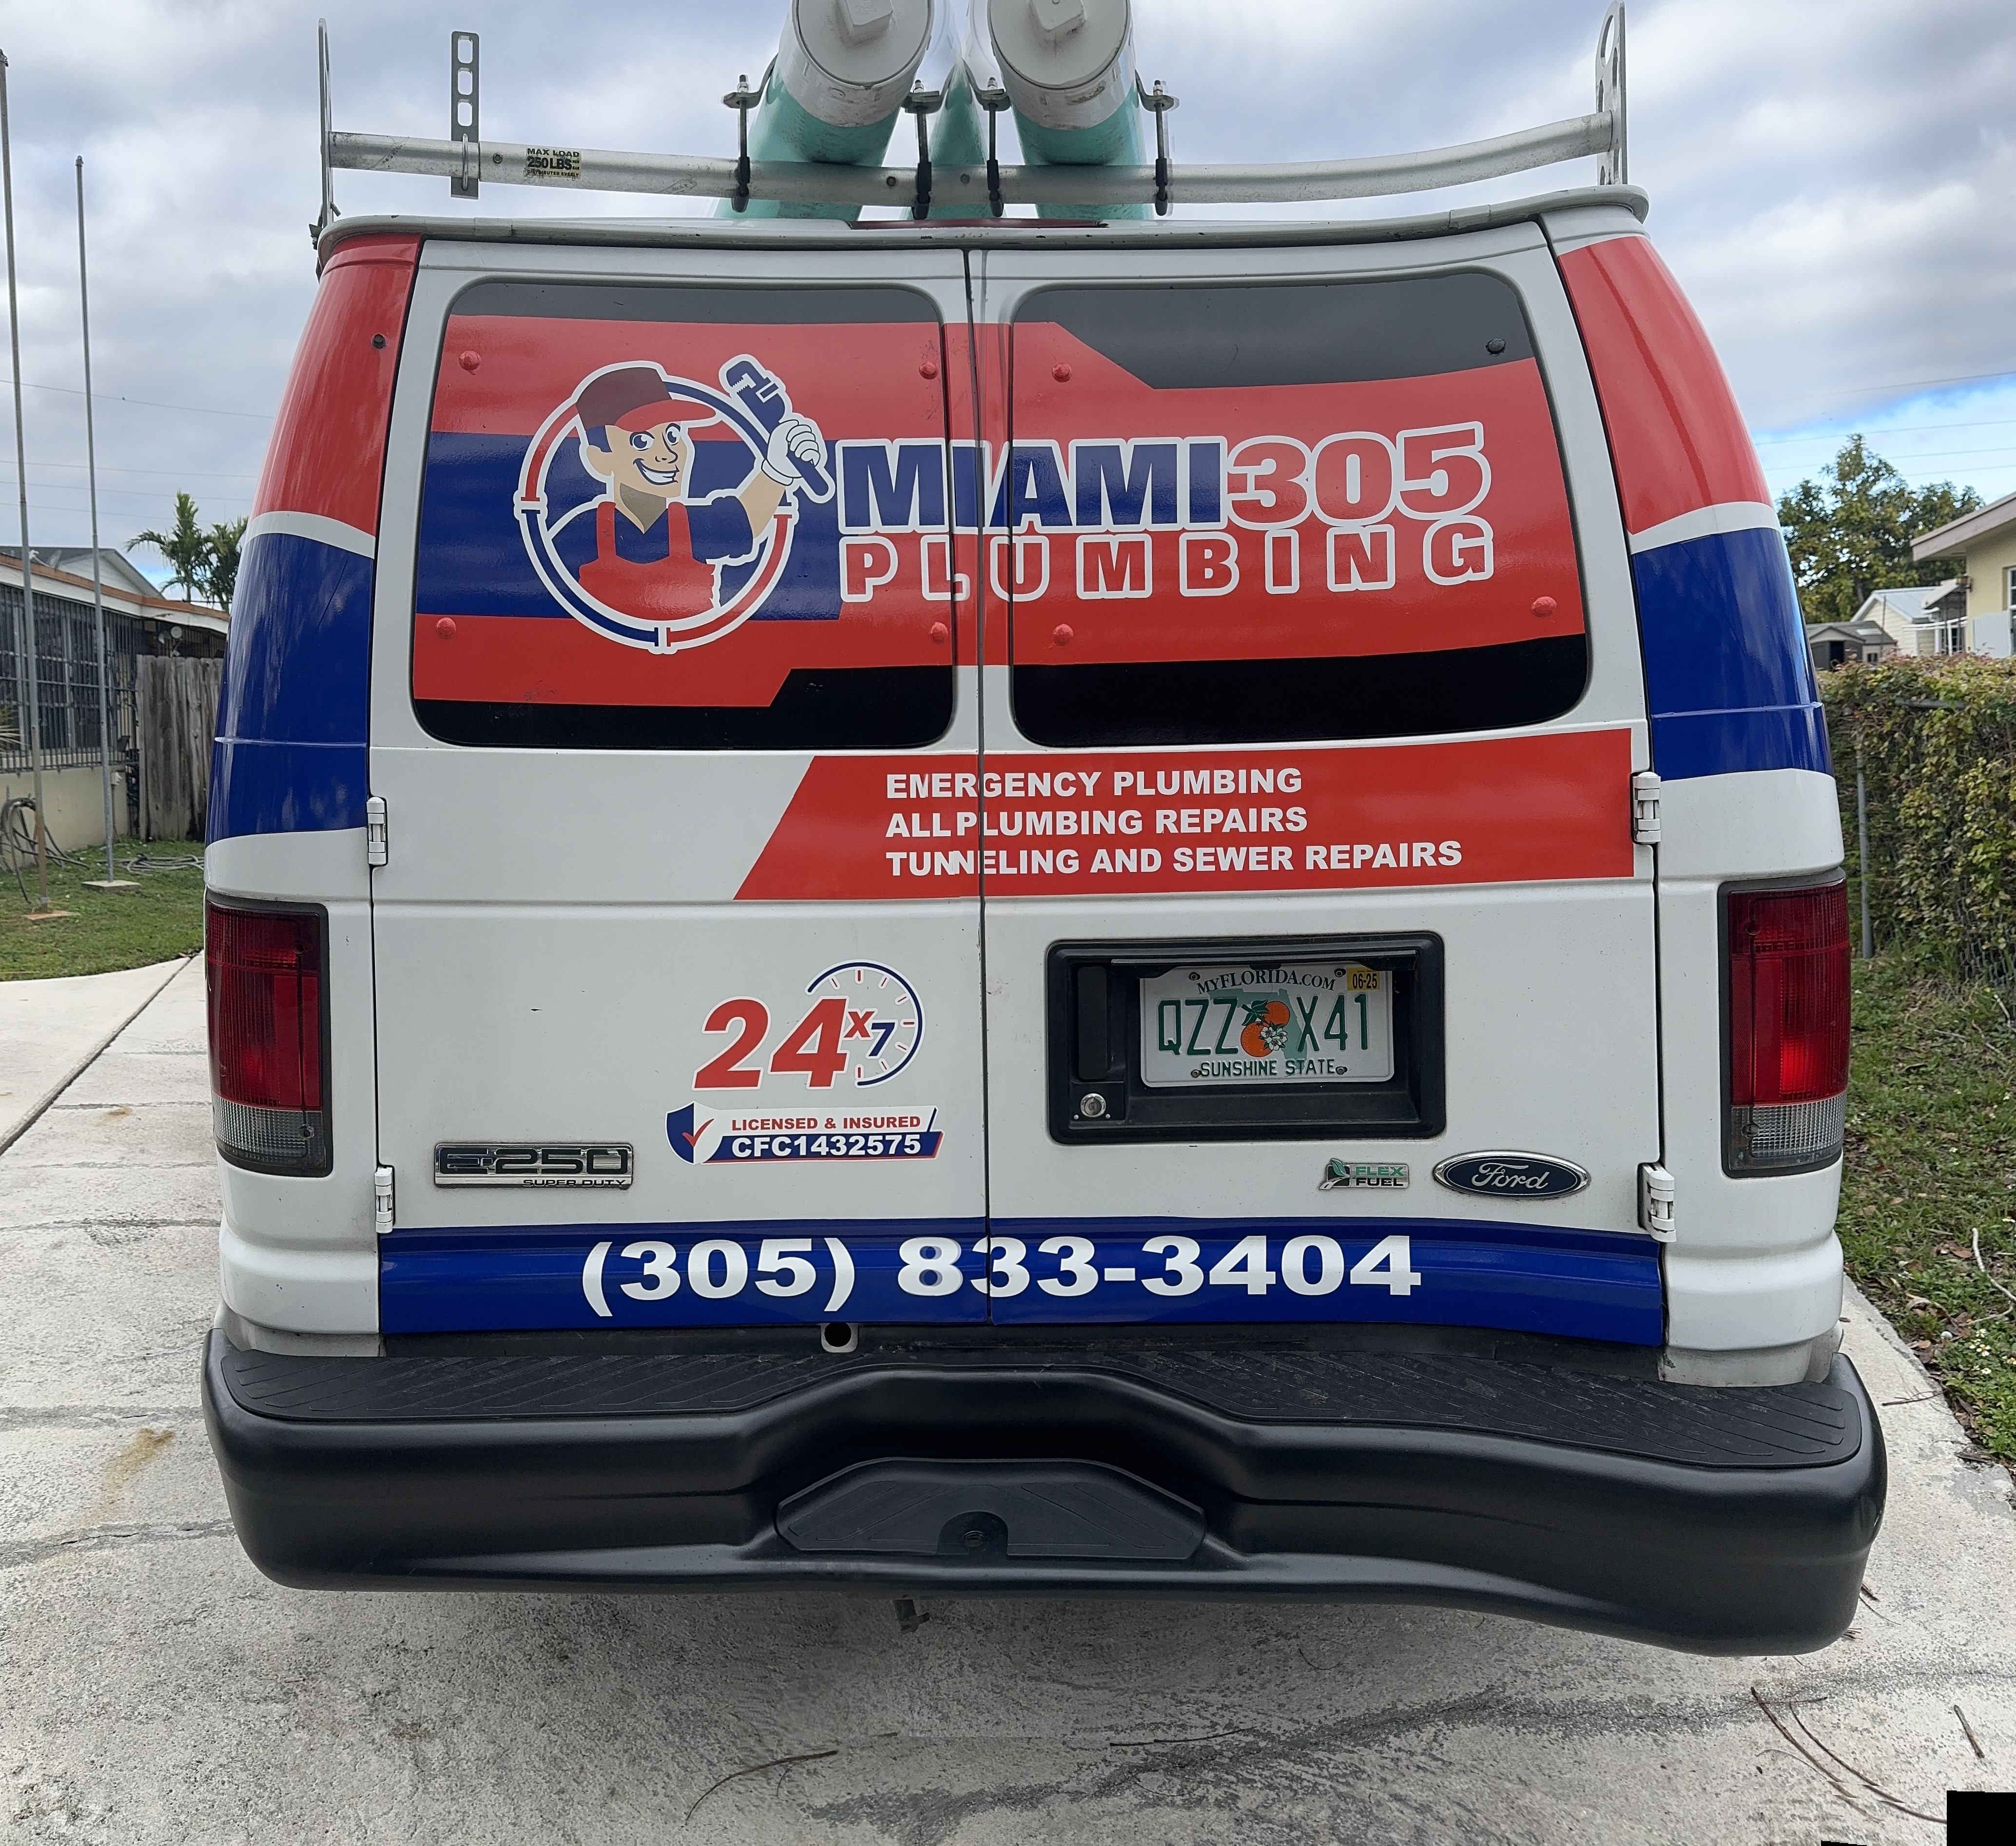 Plumbers near me in Miami - Photos of Our Business -  Miami 305 Plumbing